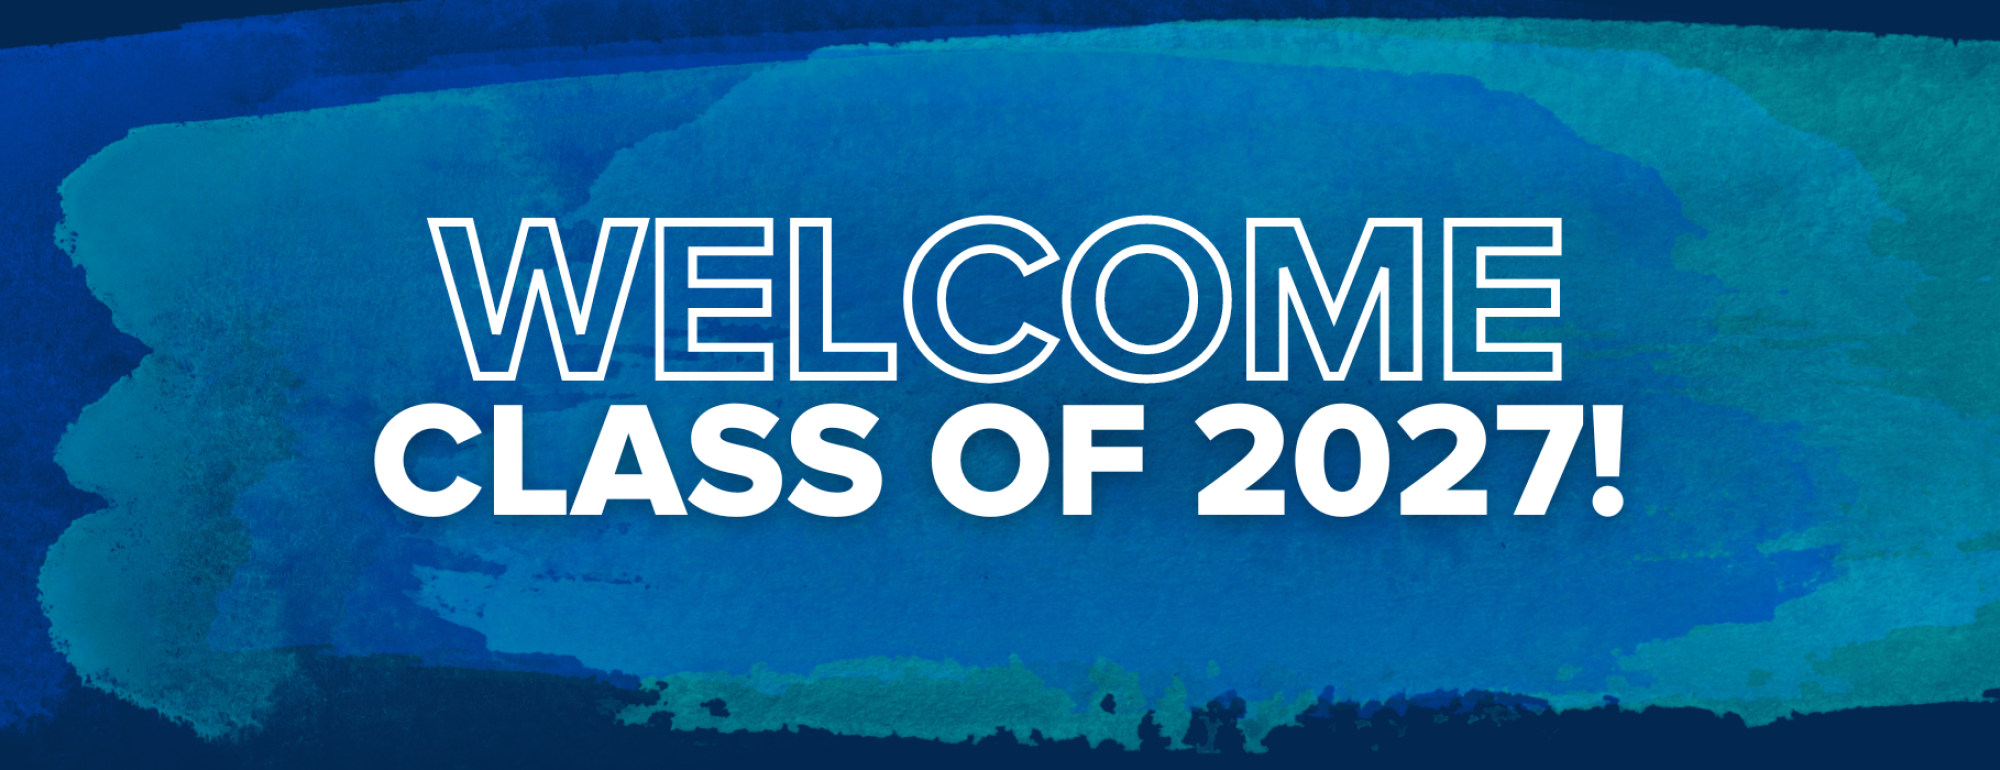 Welcome Class of 2027!